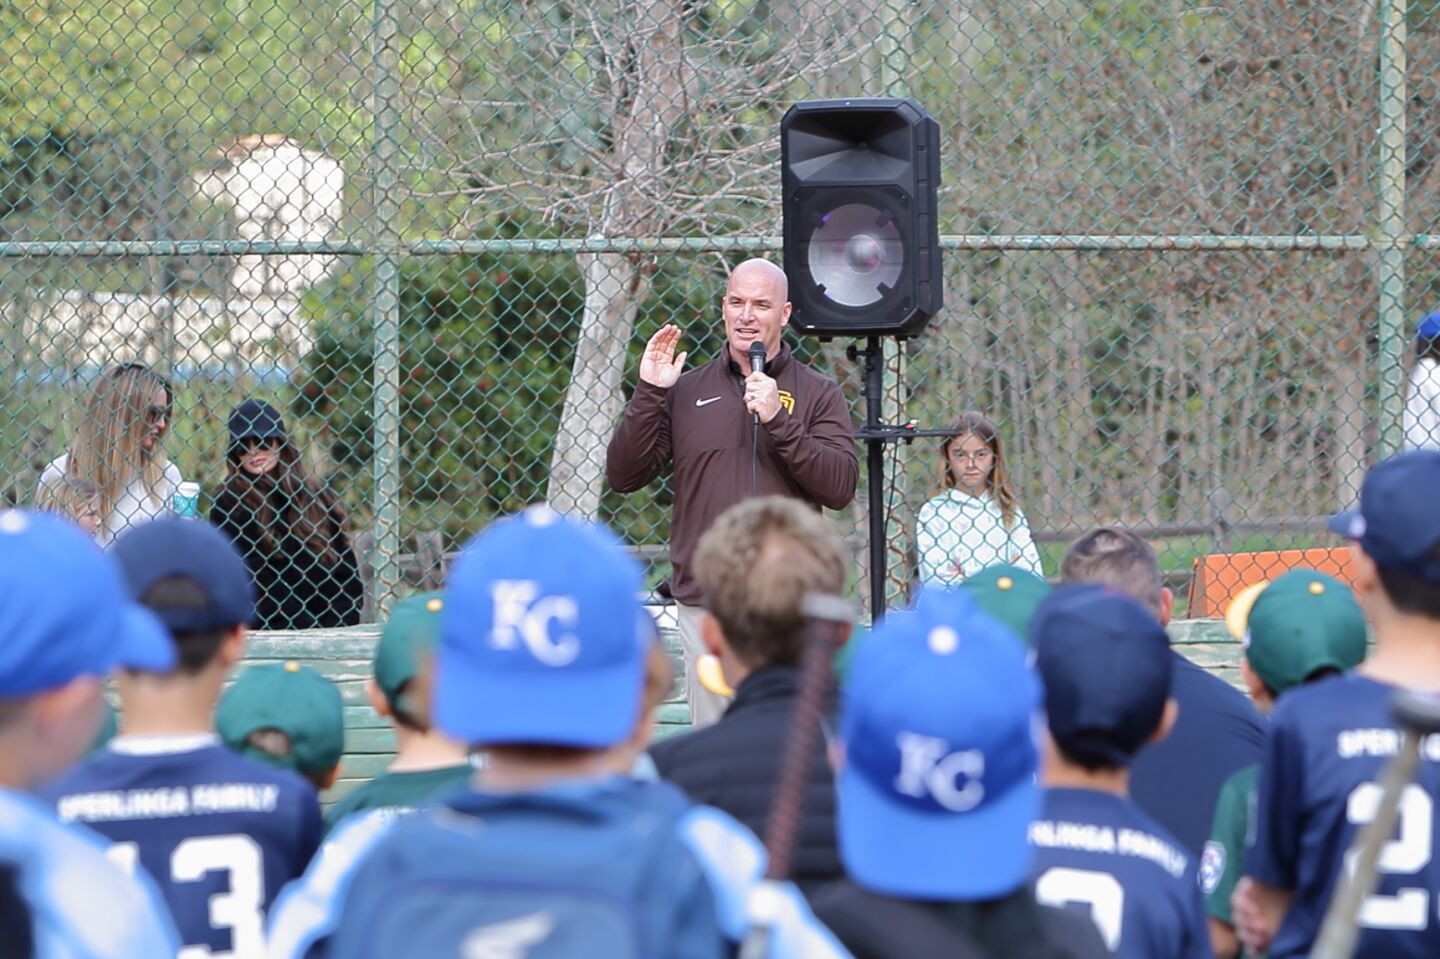 Former MLB player Mark Sweeney encourages the players to cherish the relationships they will make in Little League